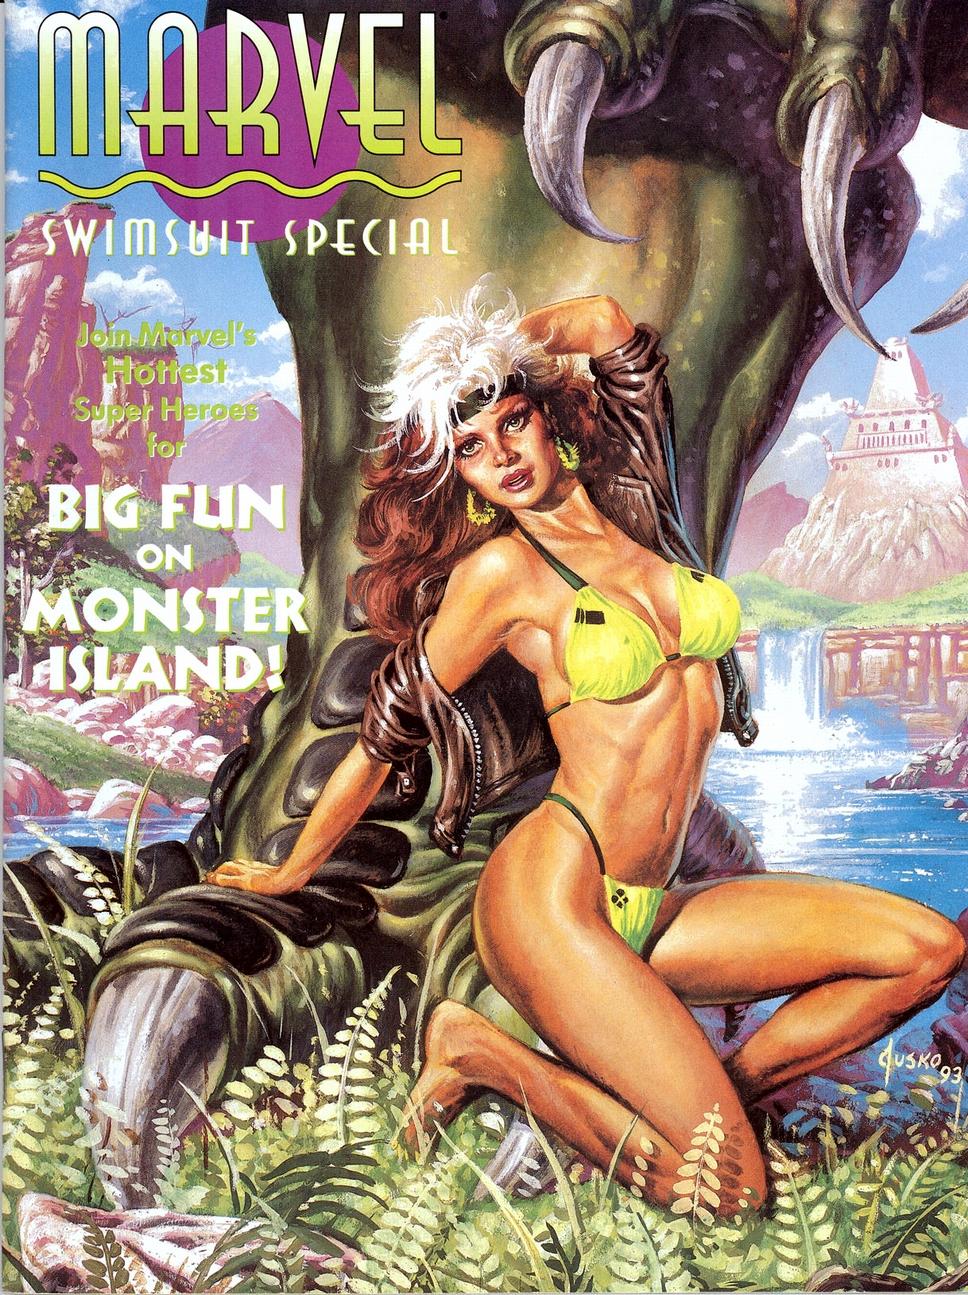 Marvel Swimsuit Special Vol. 1 #2